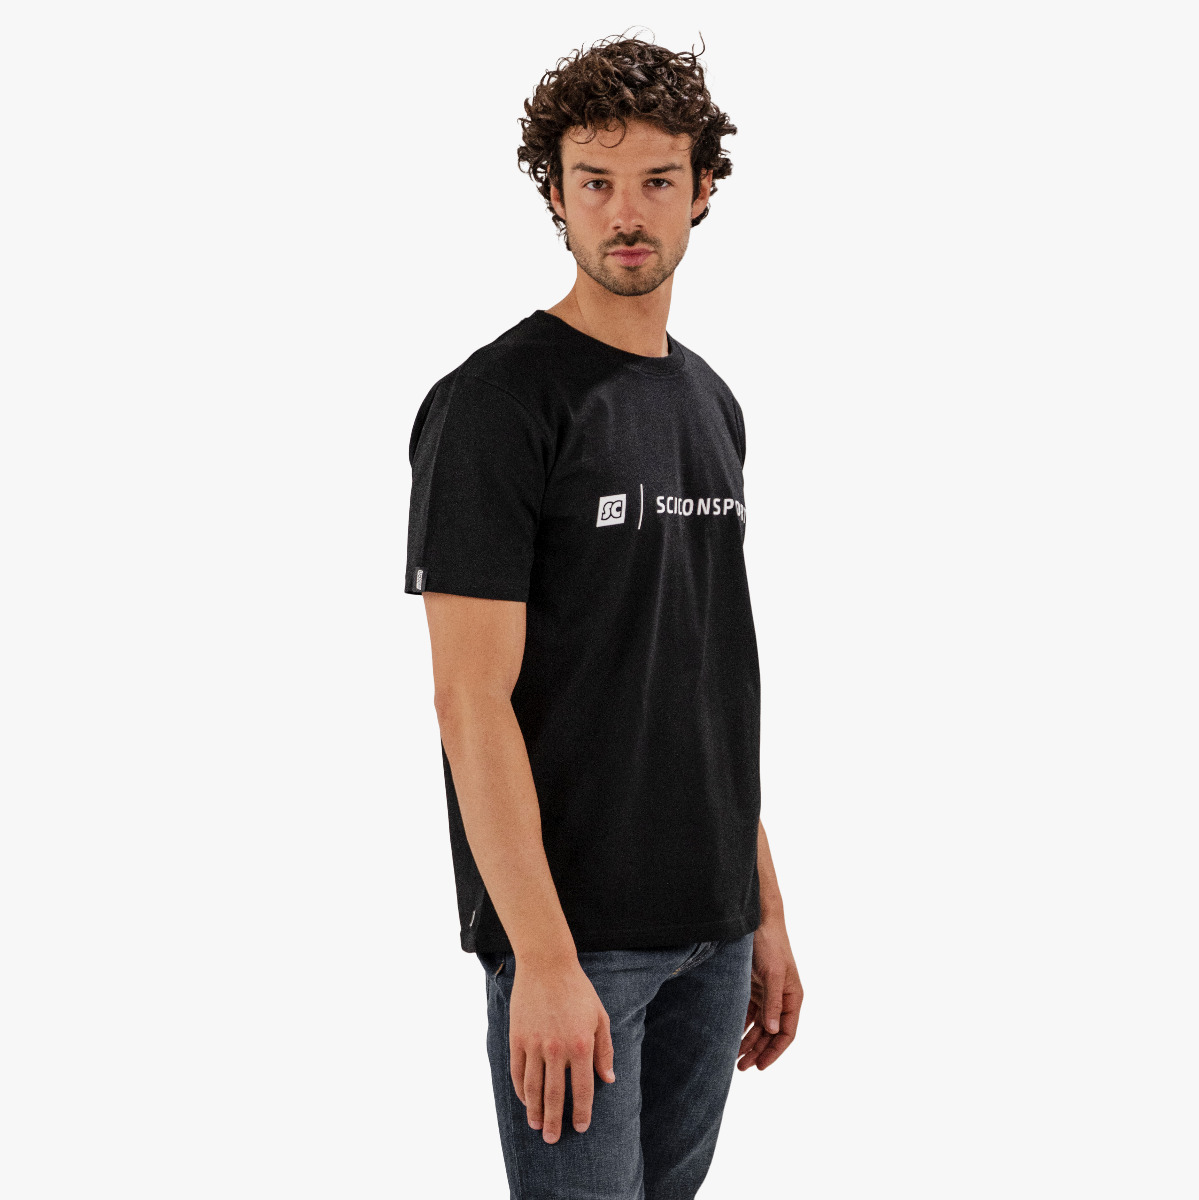 SCICONSPORTS T-SHIRT